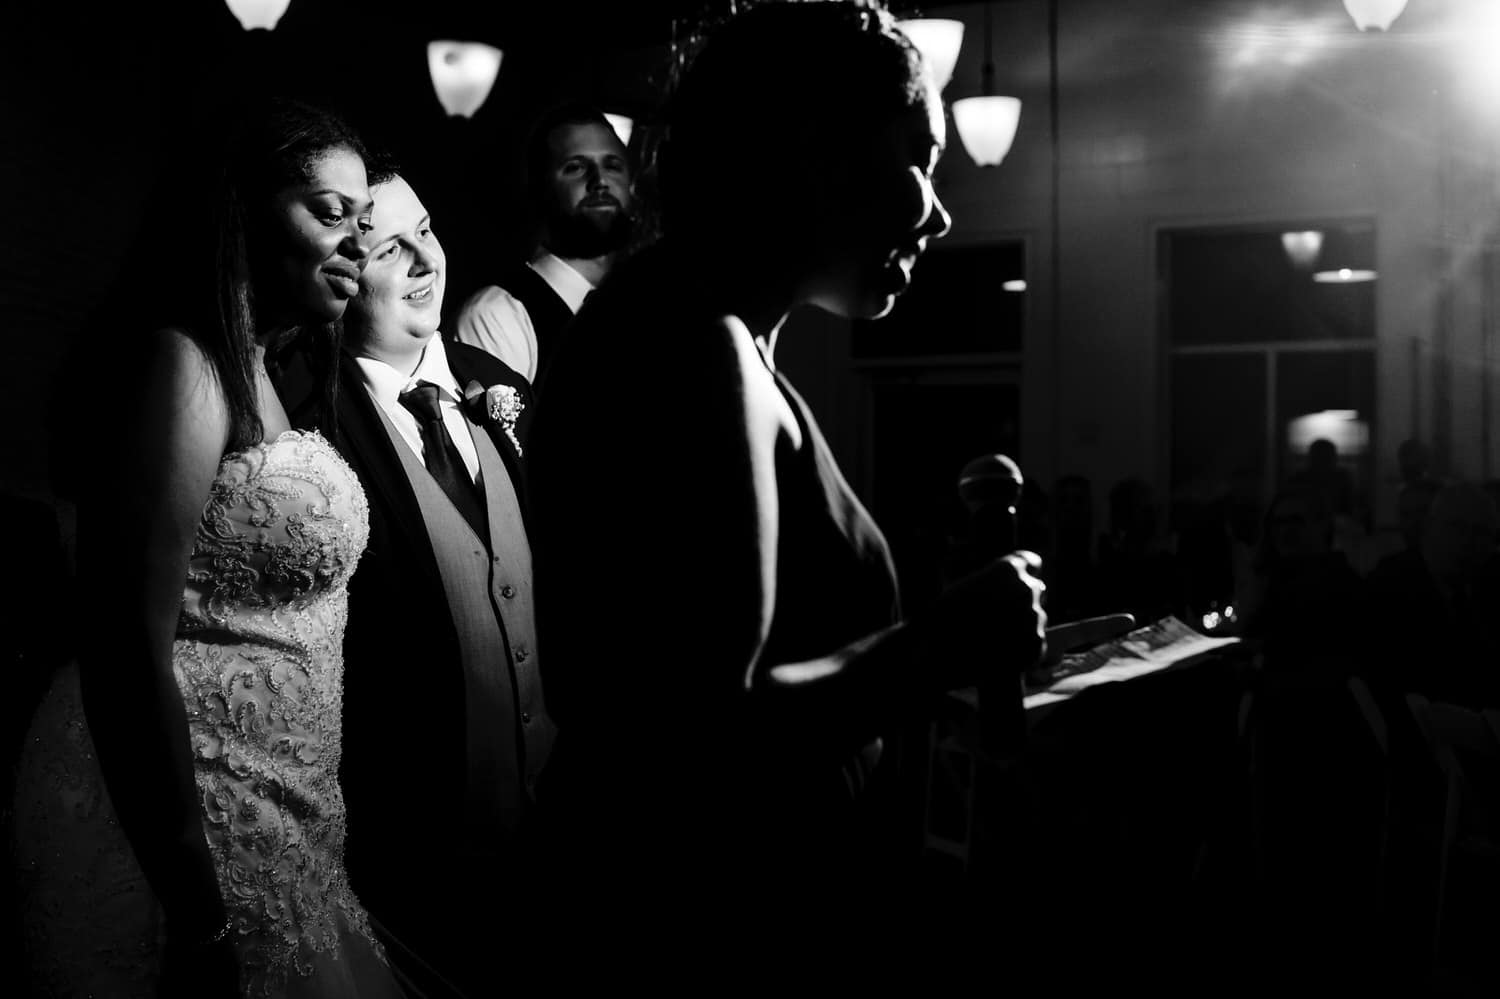 A candid black and white picture of a maid of honor toasting the bride in the foreground, with the image focus on the bride and groom emracing and listening in the background during their wedding reception at The Station in Kansas City.